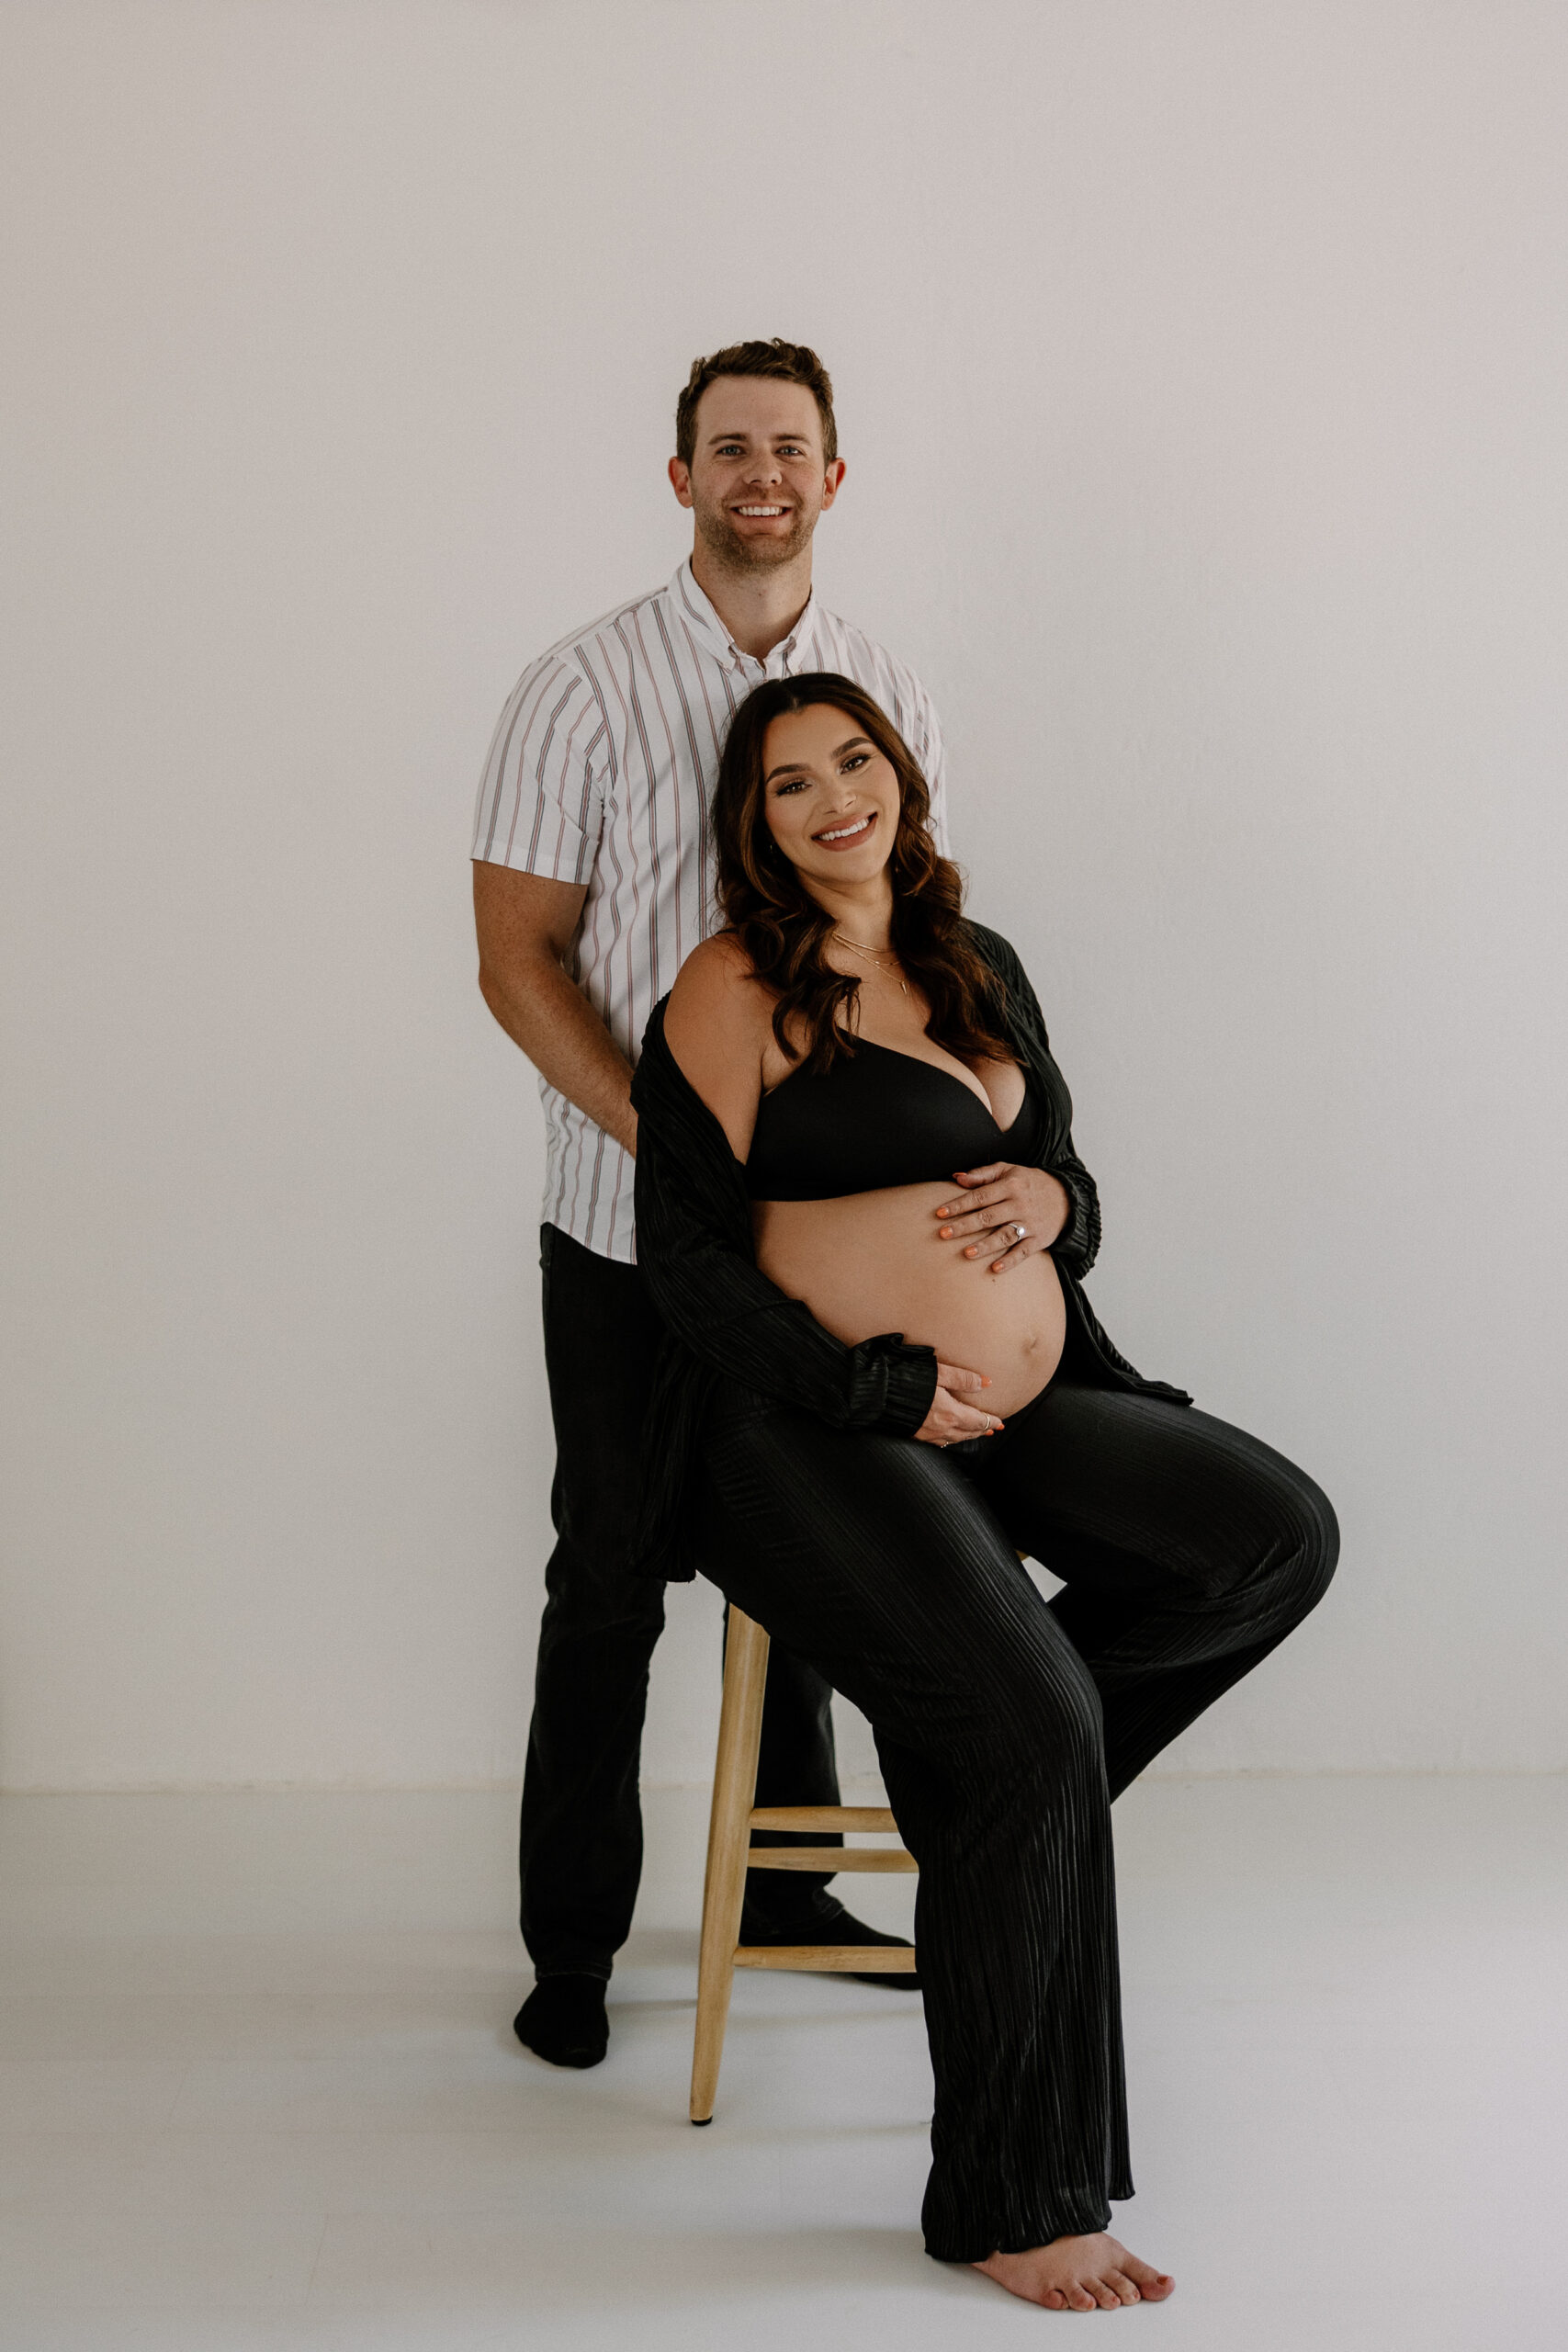 mom to be sitting on a stool and dad to be behind her smiling 